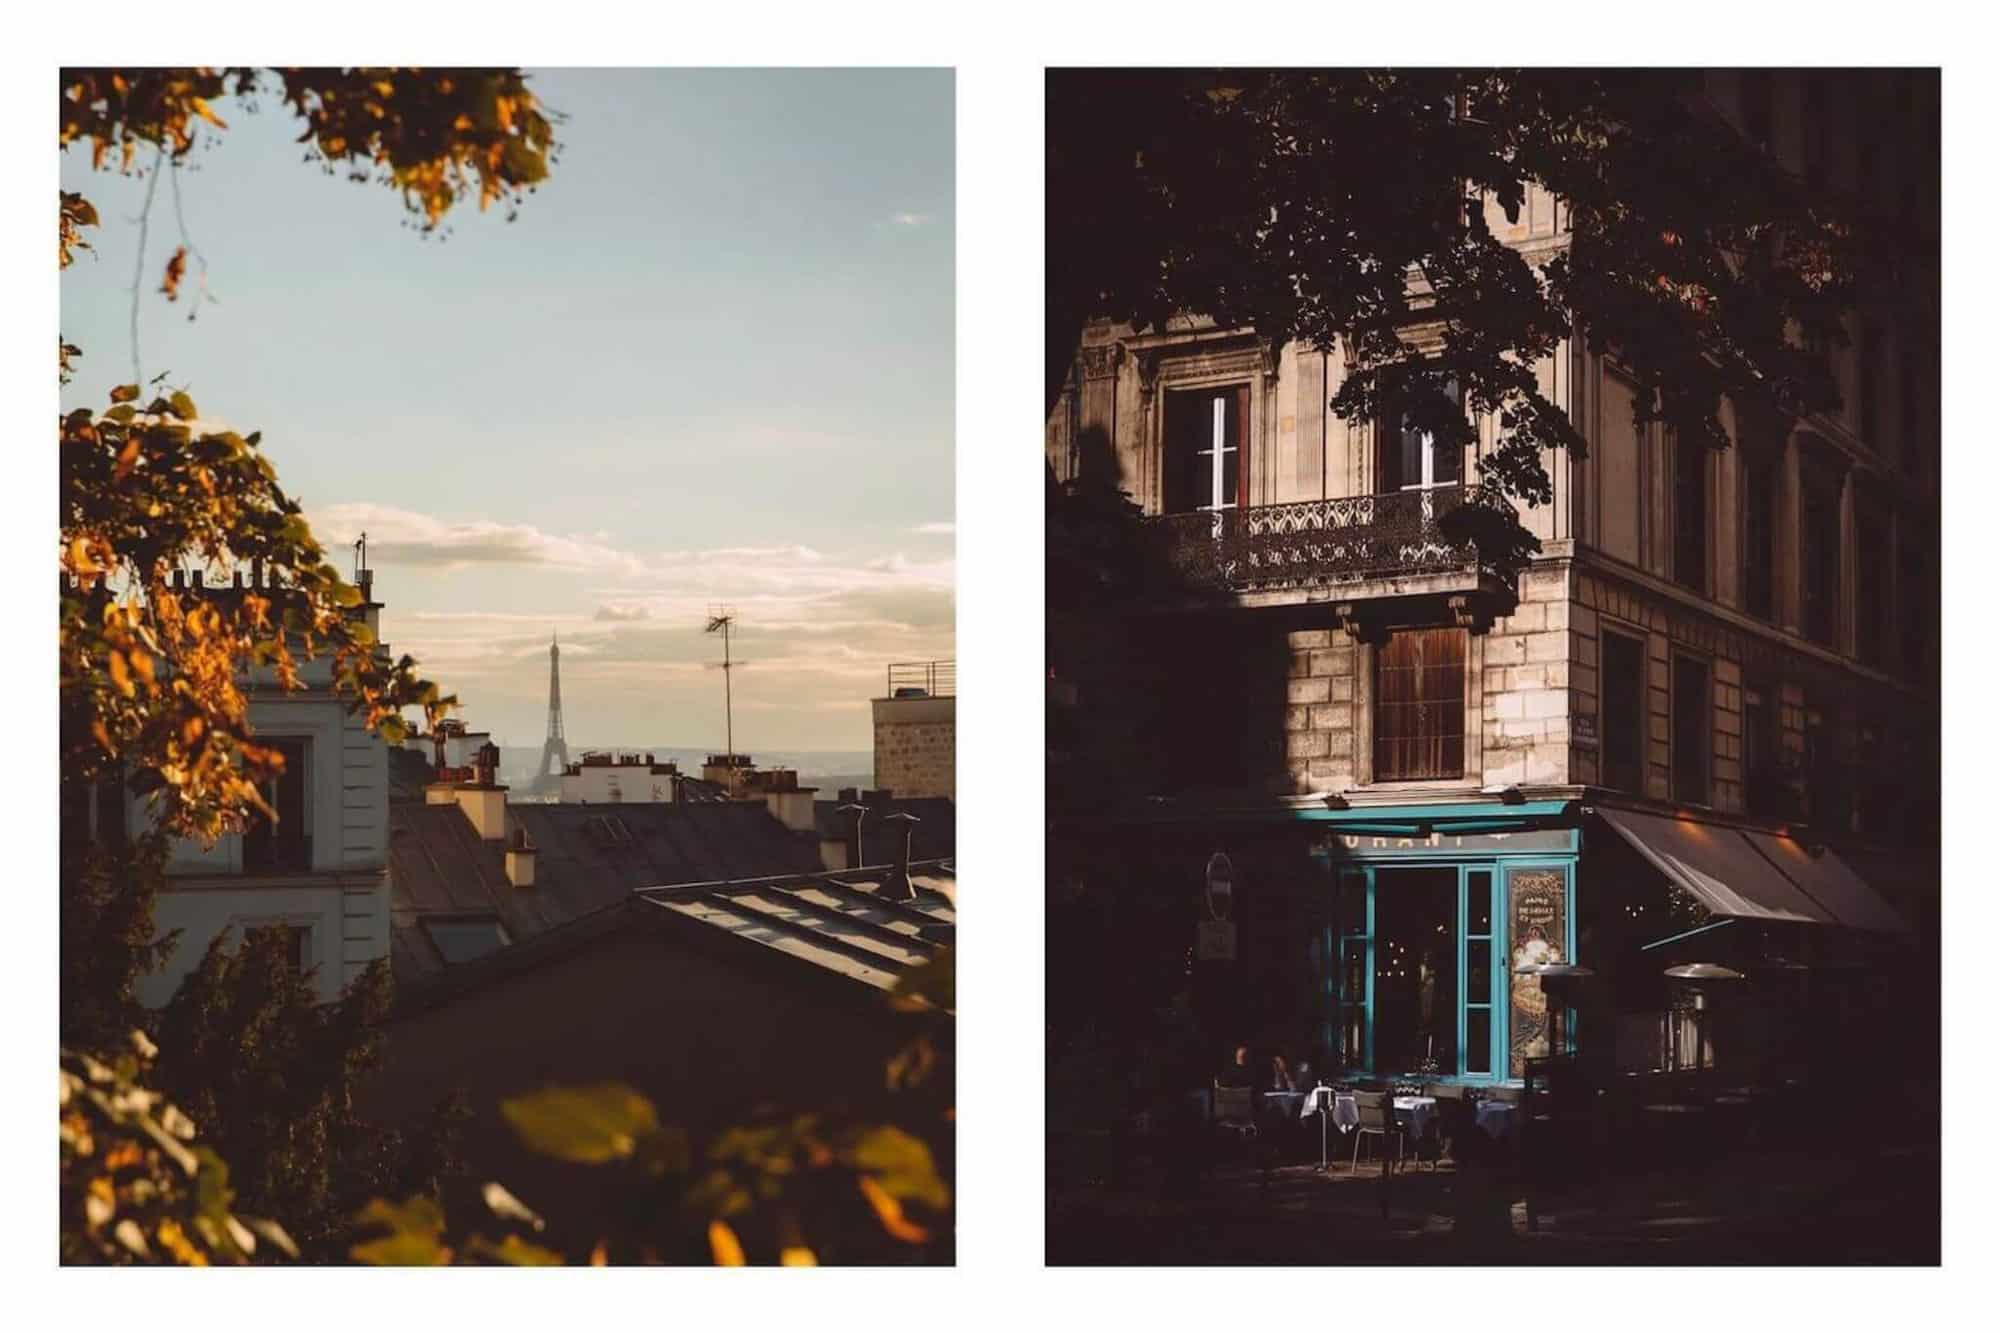 Left: a vies of Paris. There are roof tops and buildings visible as well as the Eiffel Tower in the distance. There are trees' leaves framing the picture and they are orange, yellow and green colored. Right: A café in Paris. There is sunlight shining on the blue exterior of the cafe and the rest of the picture is shaded. There are trees' leaves visible at the top on the picture.